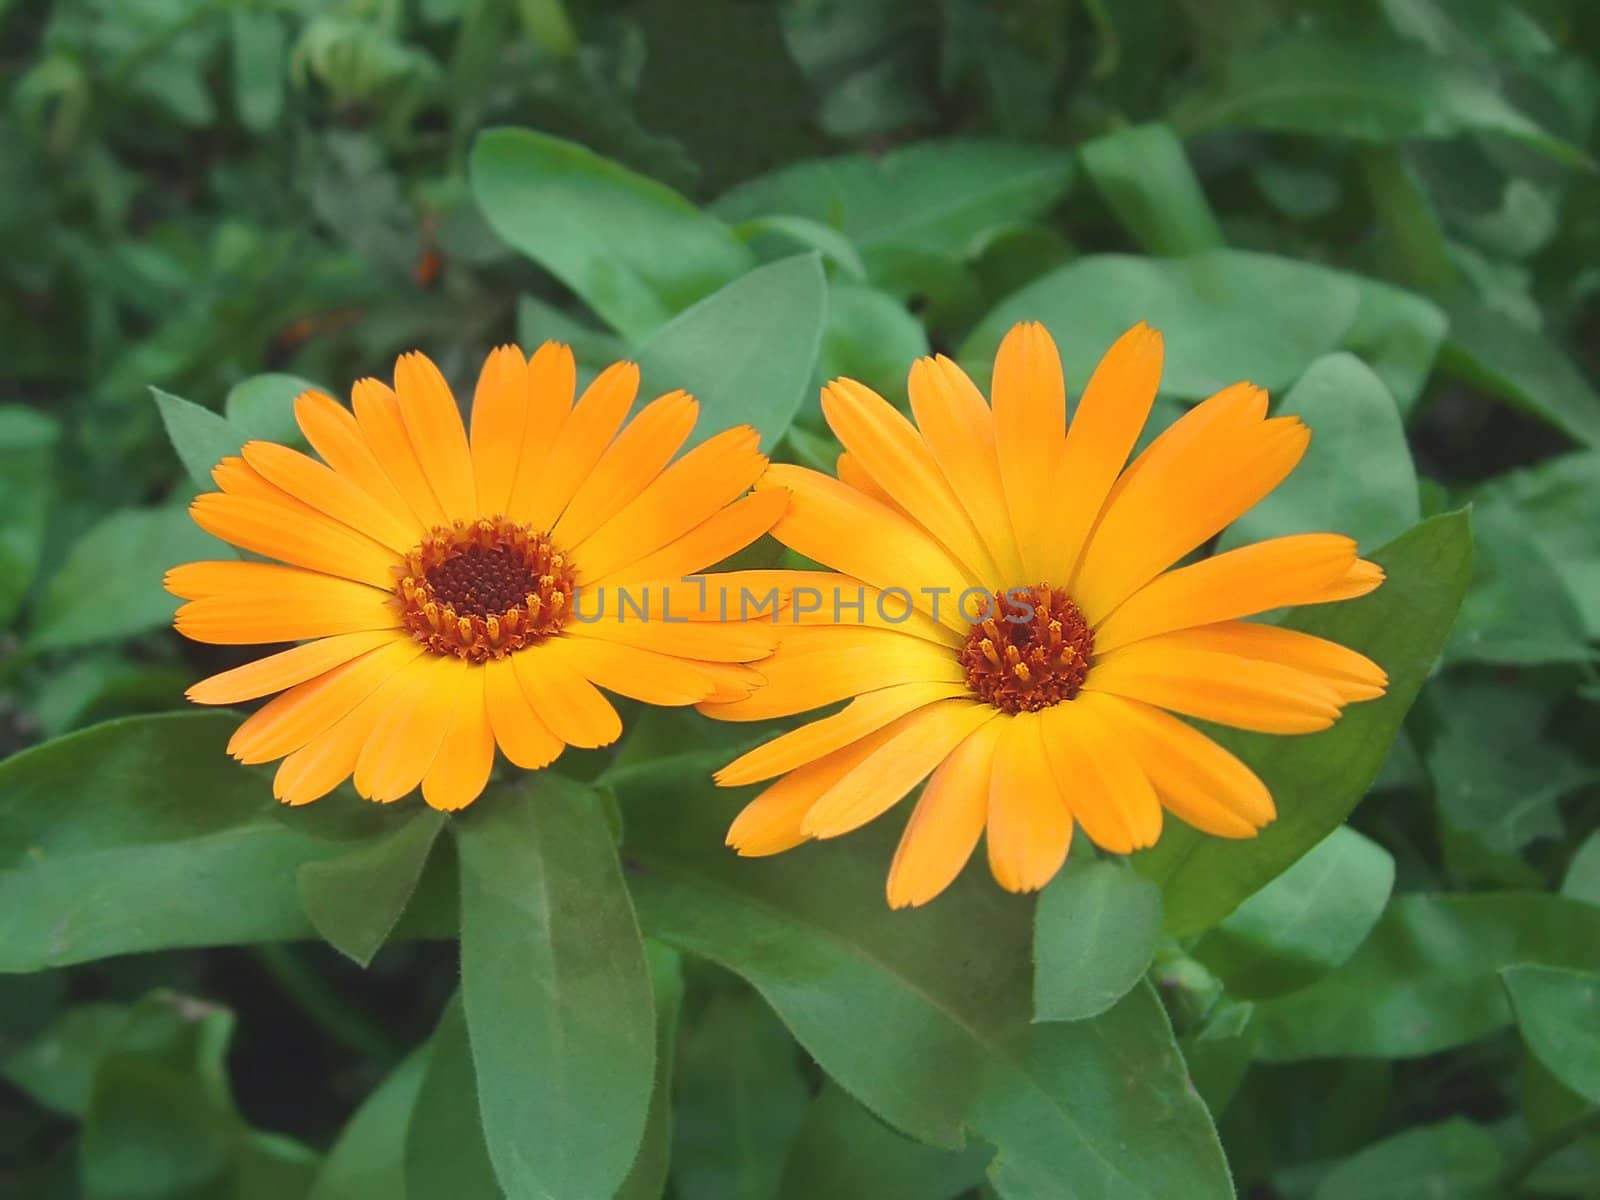 The original image of two yellow flowers in avenue of a shady garden